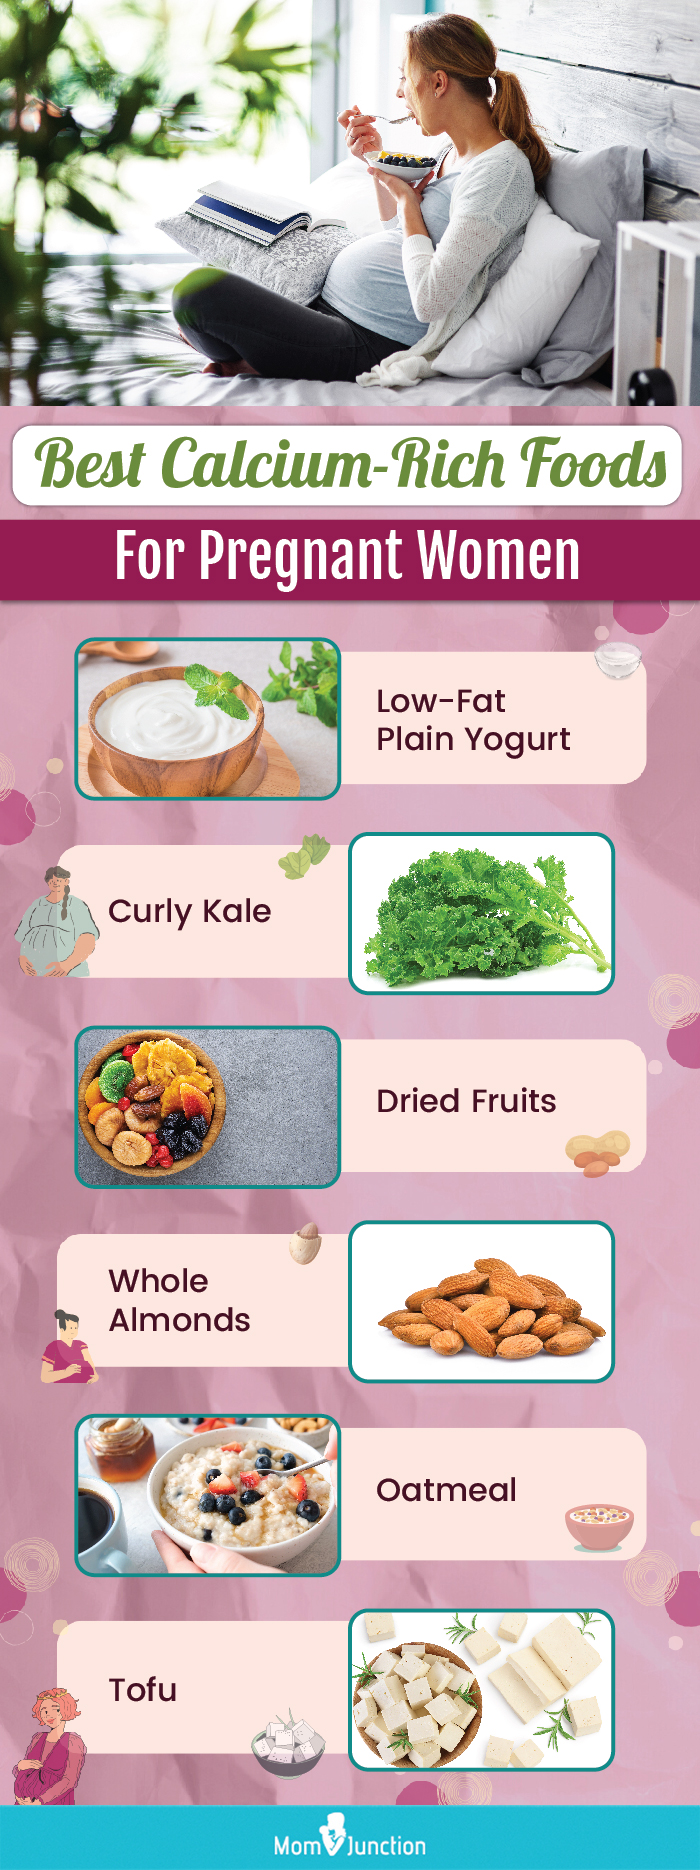 calcium fruits and vegetables